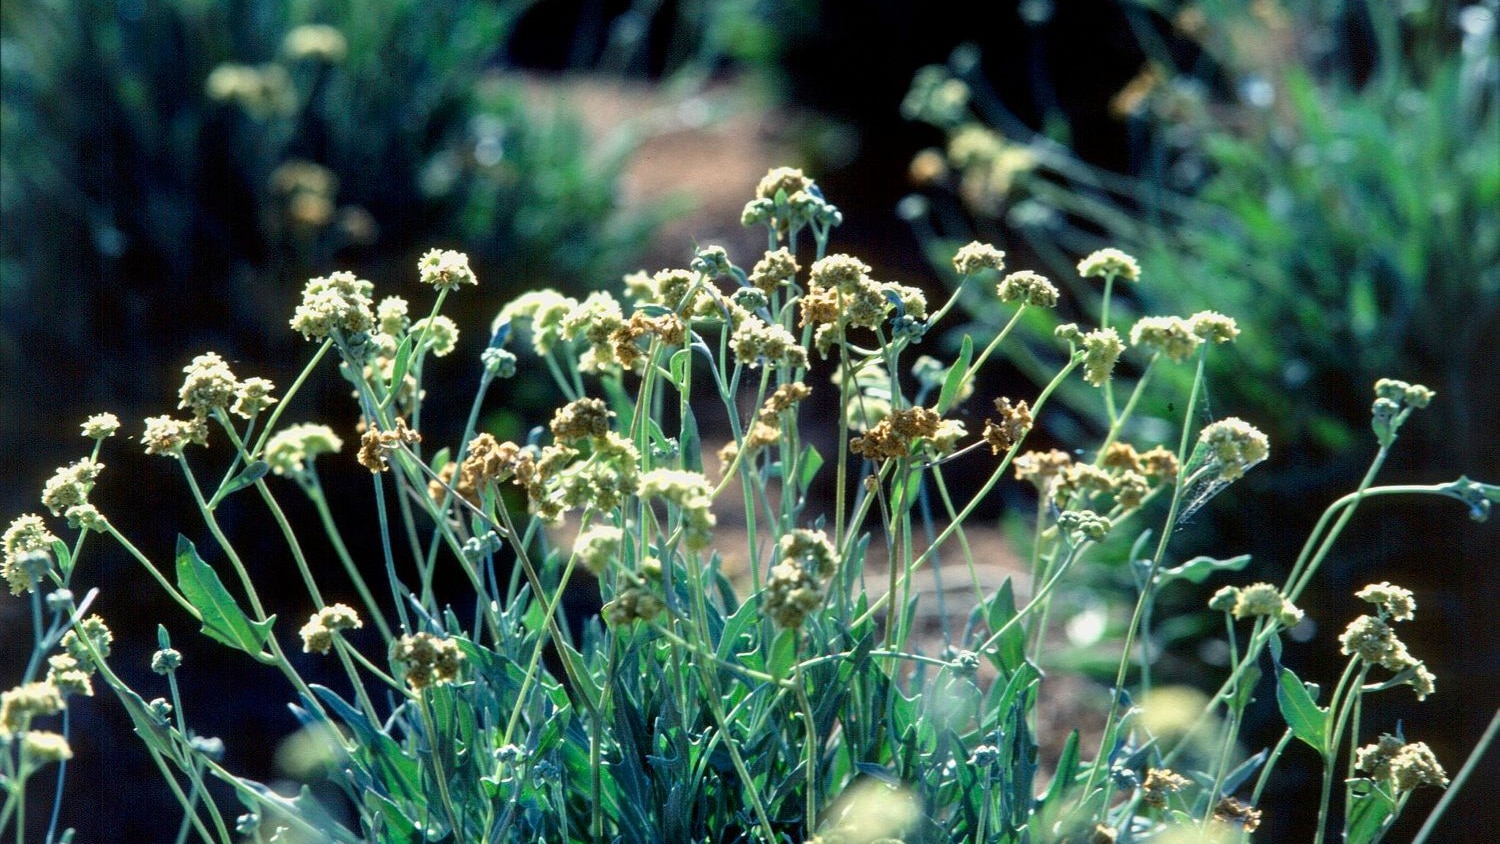 Guayule plant [Image: U.S. Department of Agriculture via Flickr]